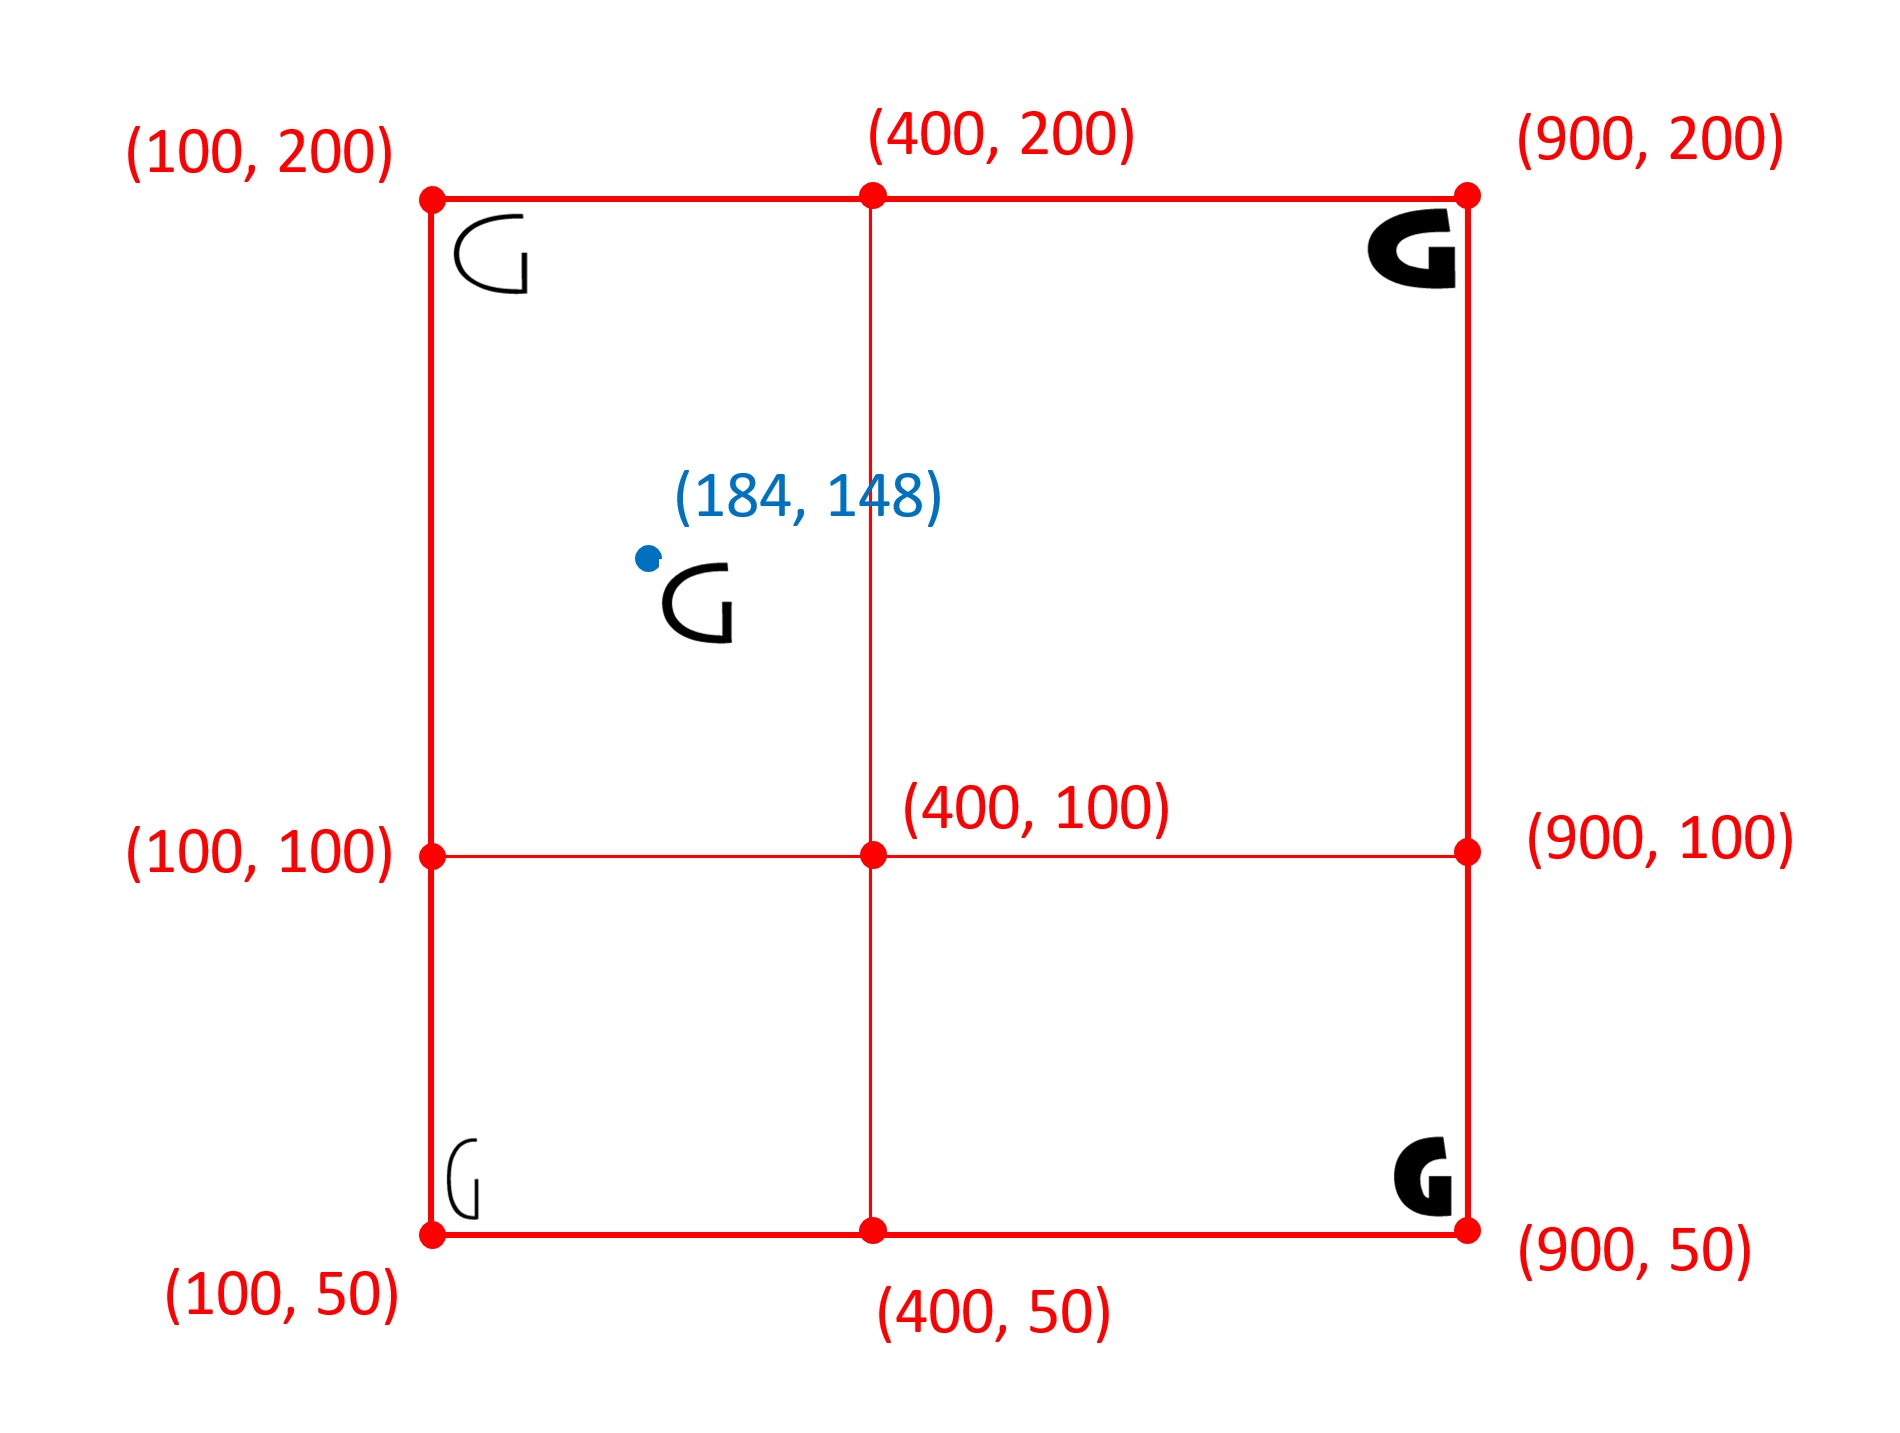 A two-dimensional coordinate space using 'user' coordinates